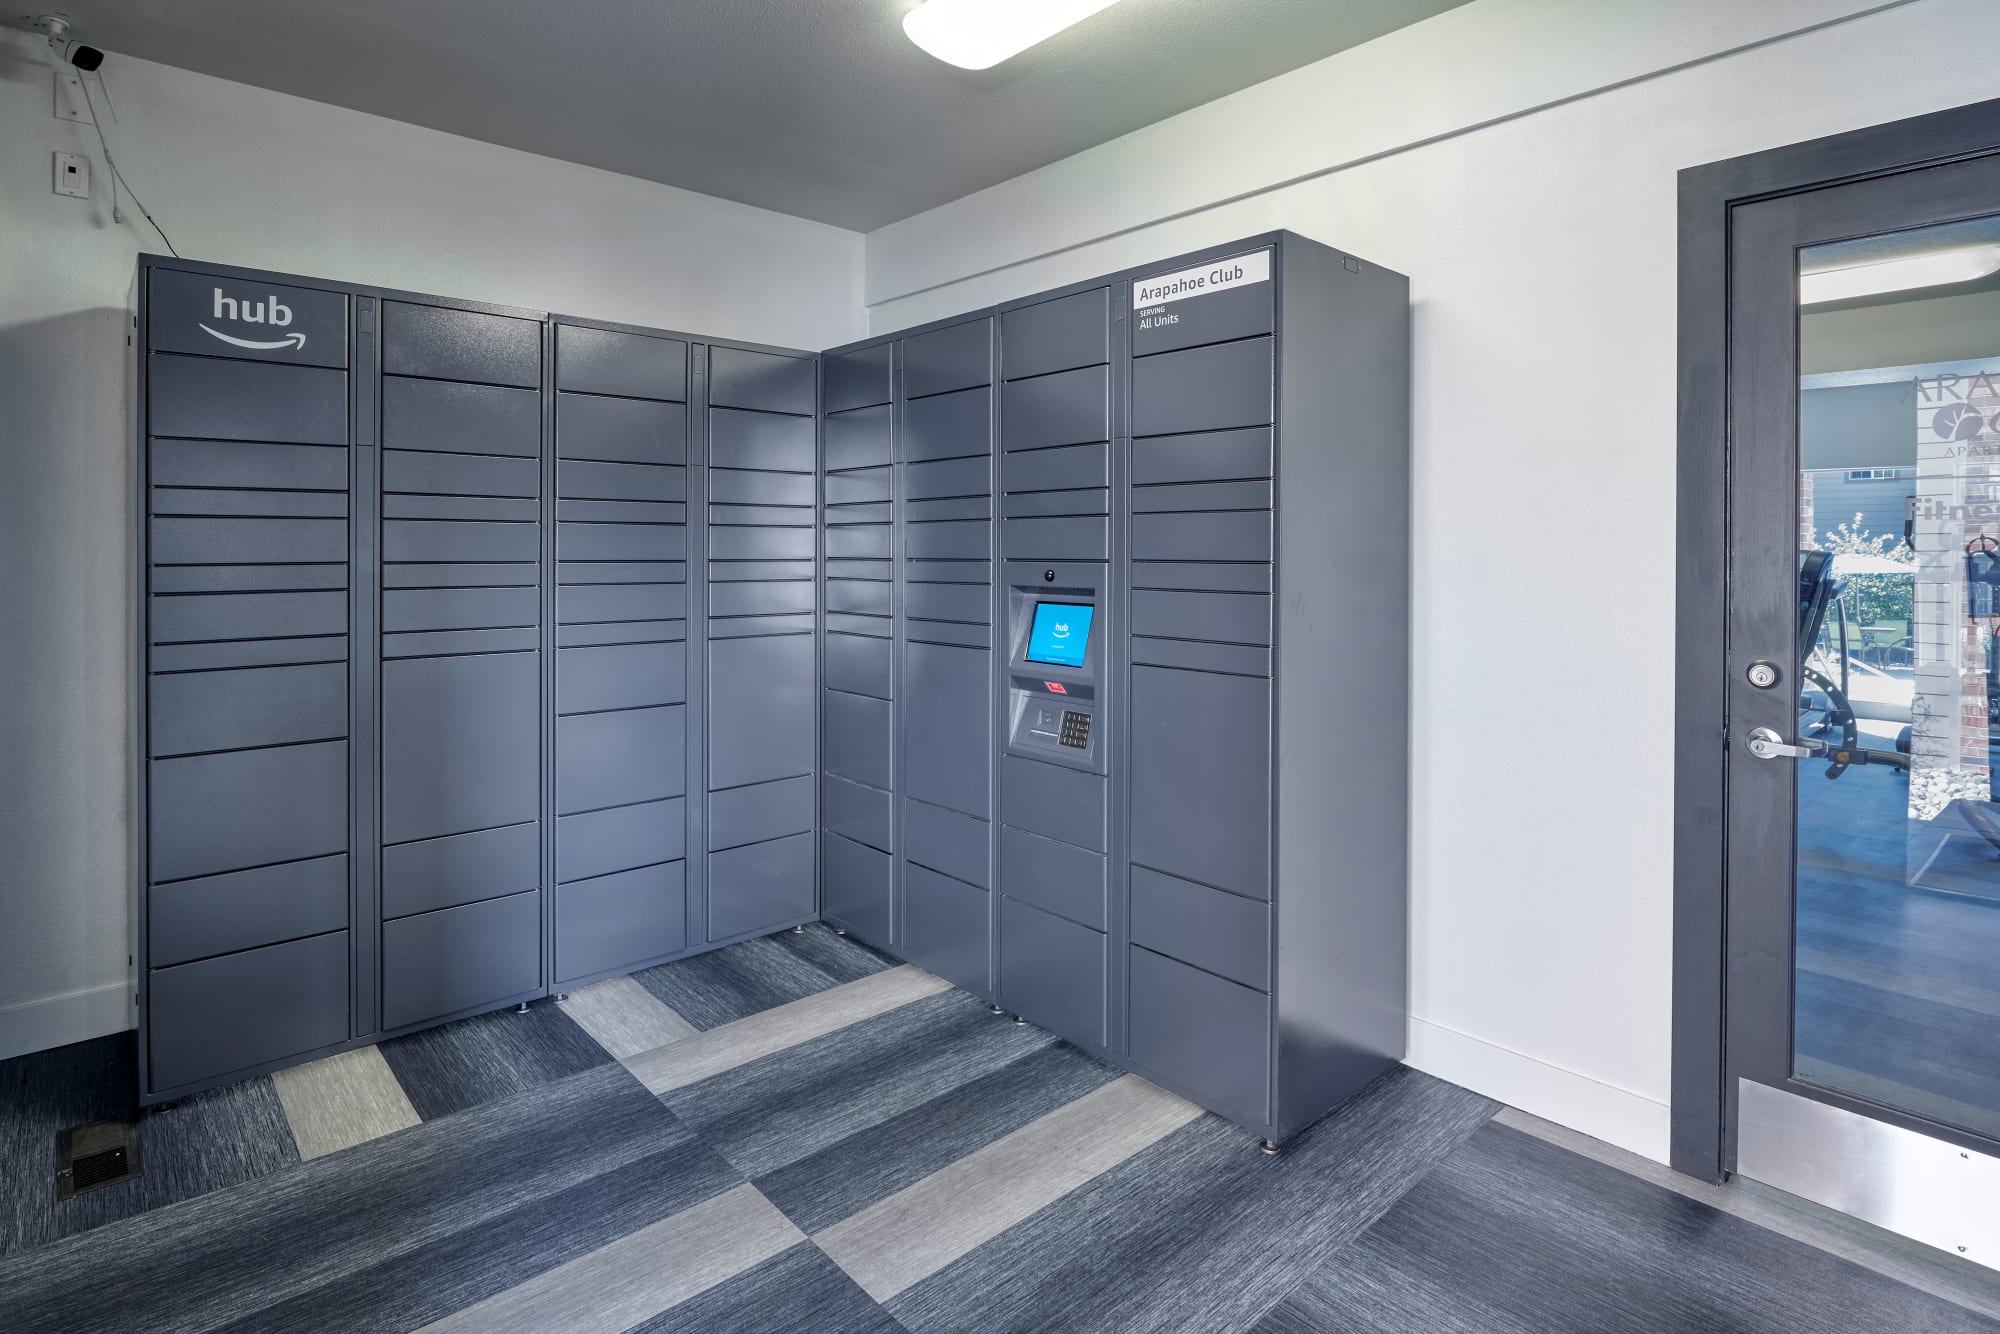 Package lockers including an Amazon hub at Arapahoe Club Apartments in Denver, Colorado